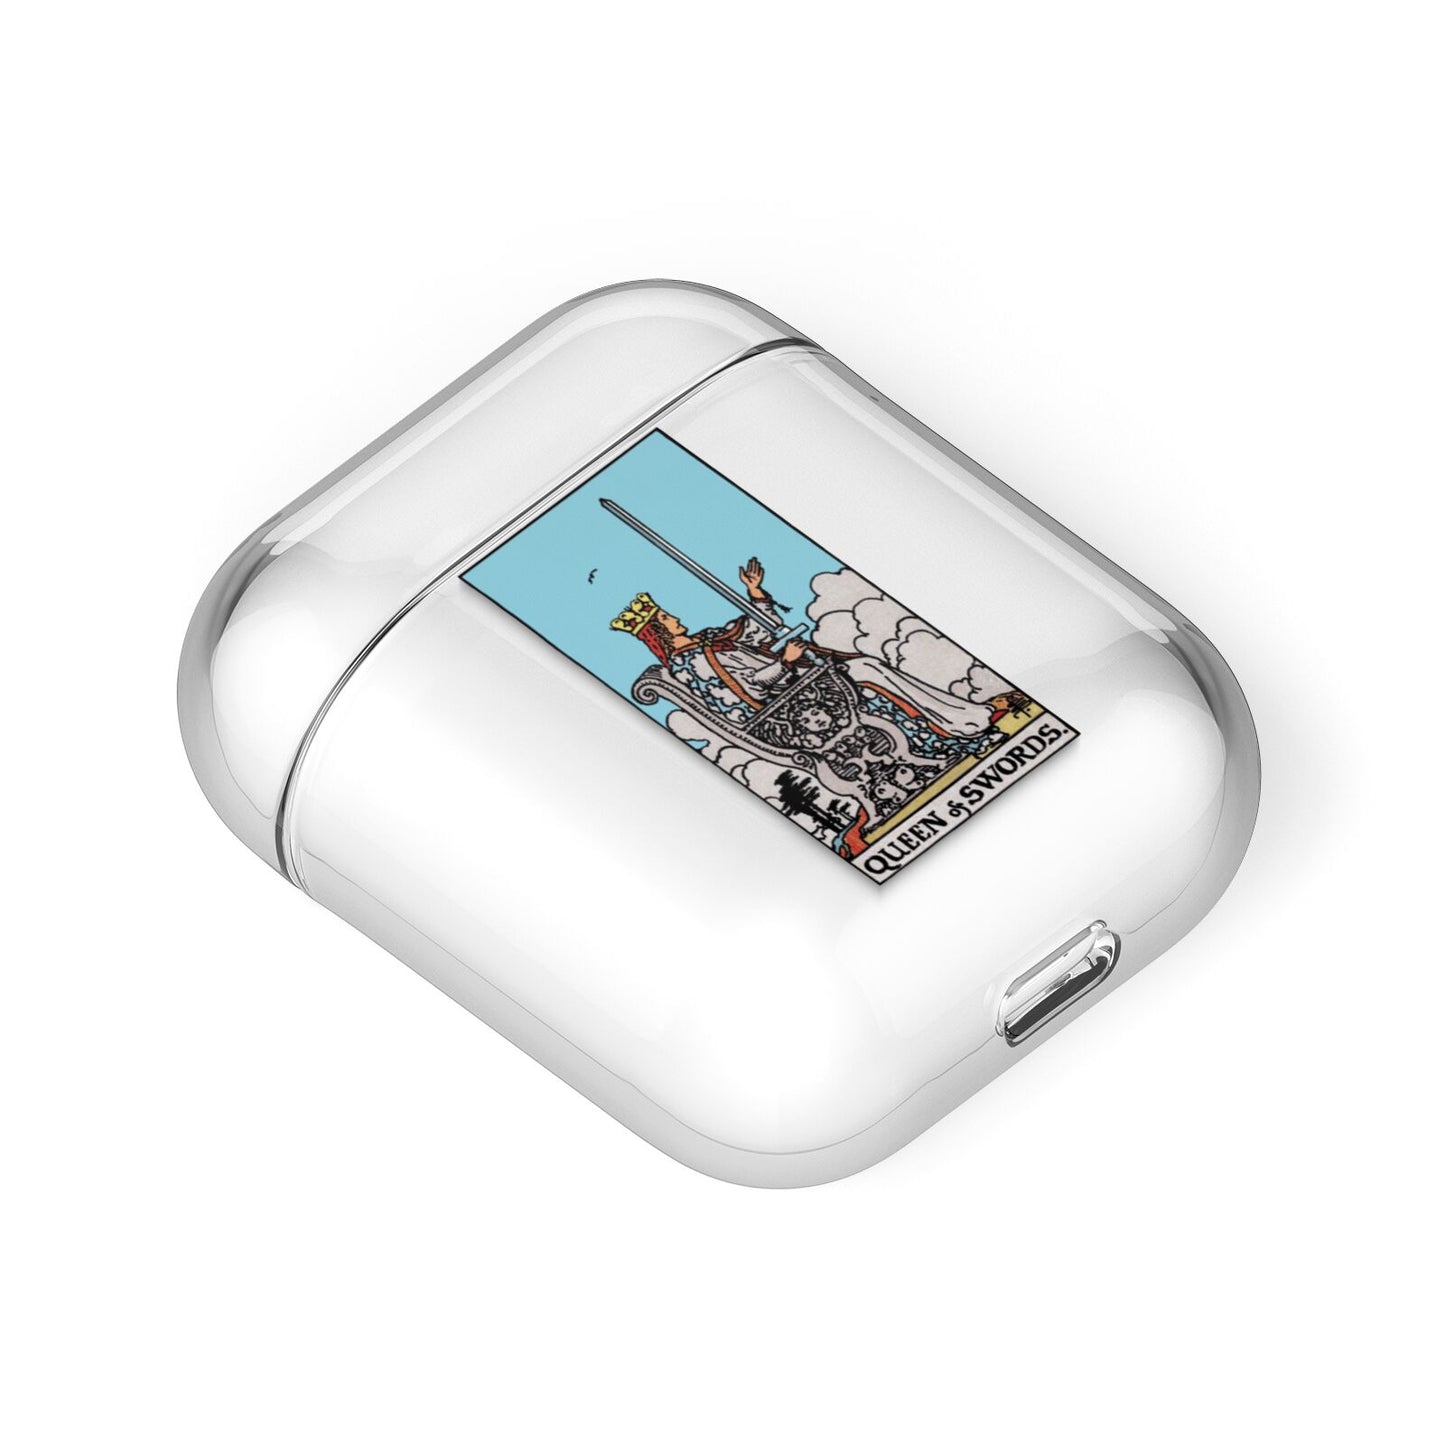 Queen of Swords Tarot Card AirPods Case Laid Flat